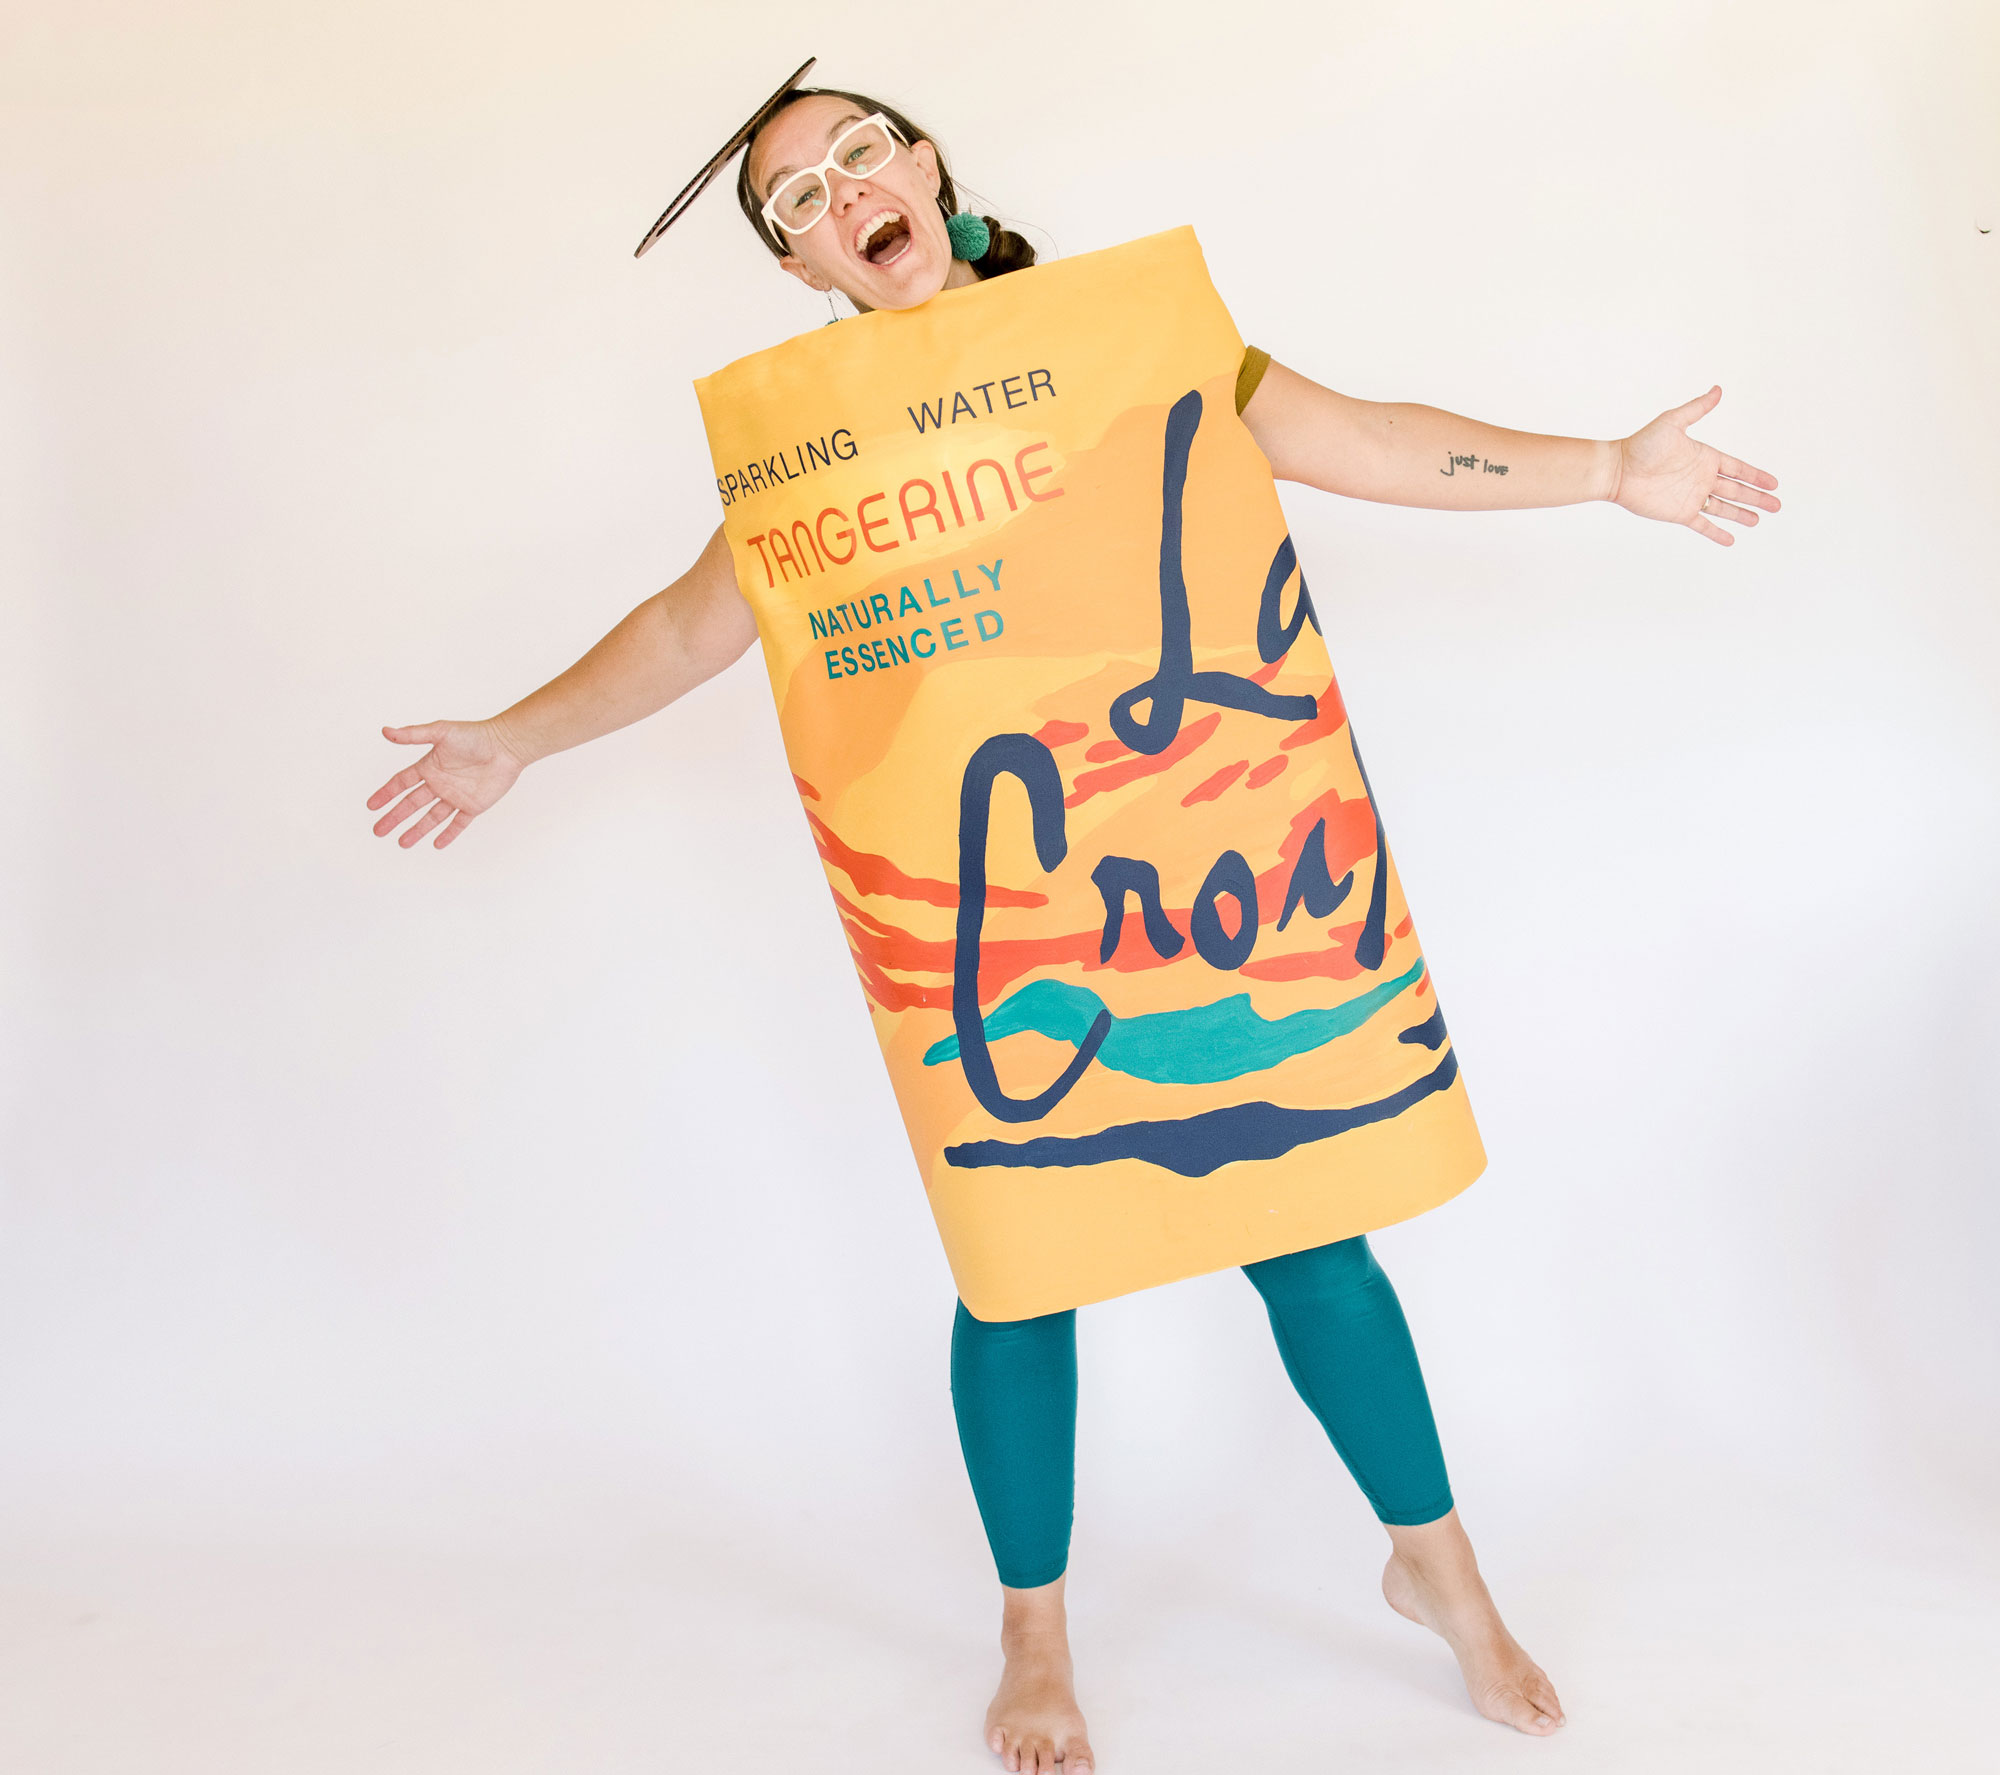 LaCroix costume DIY, LaCroix can costume, How to make a LaCroix costume, halloween costume ideas, How to make a LaCroix costume for Halloween